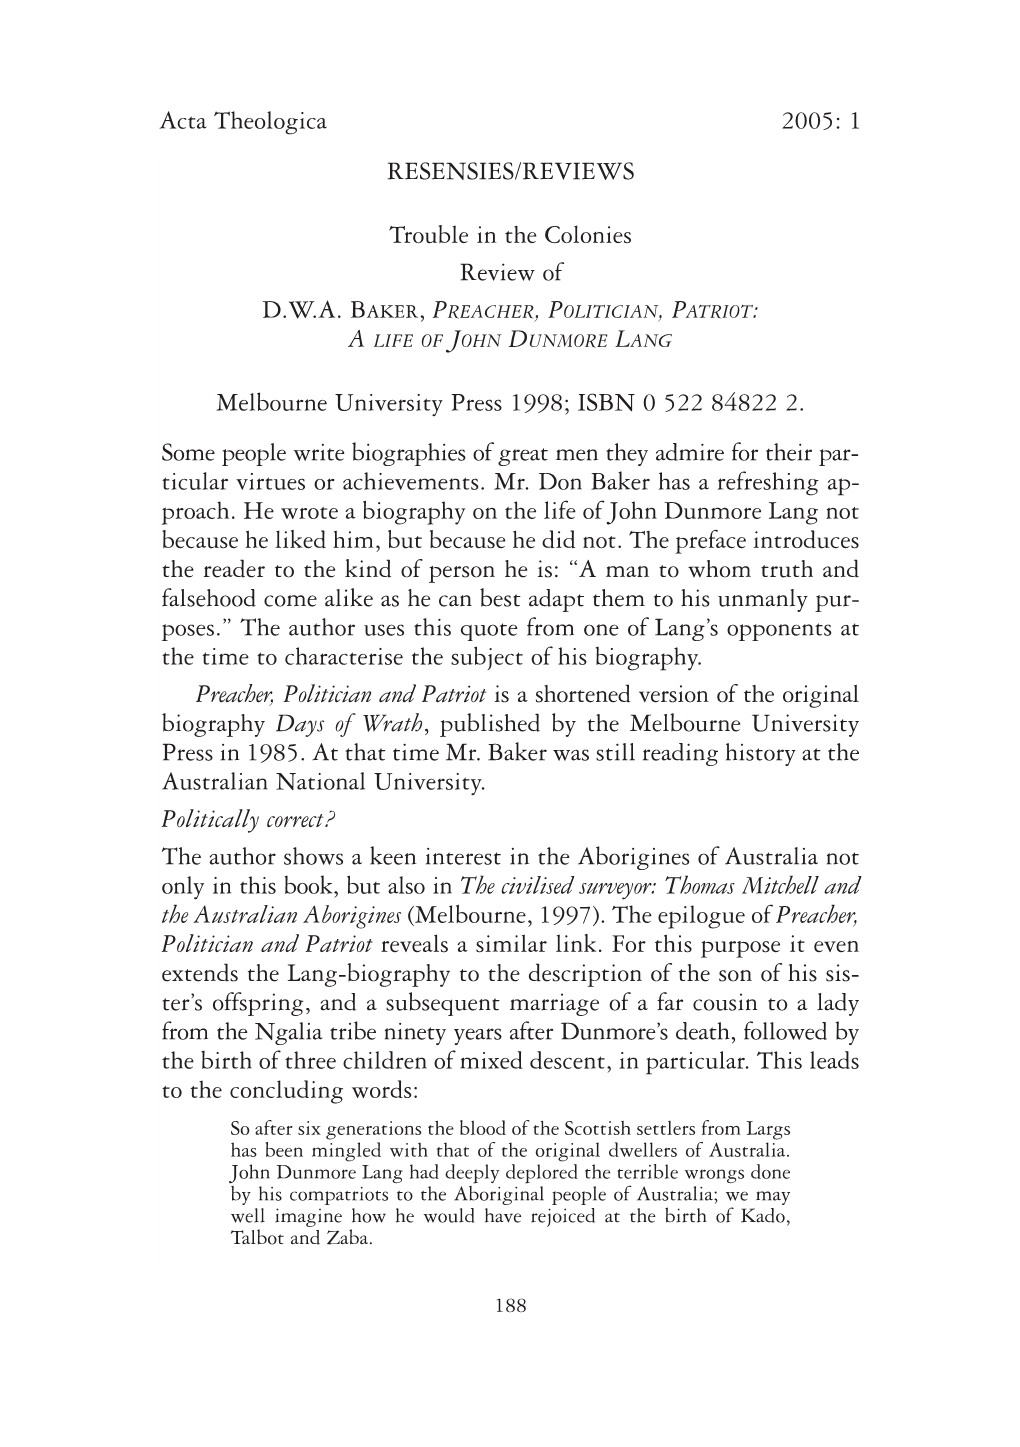 Acta Theologica 2005: 1 RESENSIES/REVIEWS Trouble in the Colonies Review of Melbourne University Press 1998